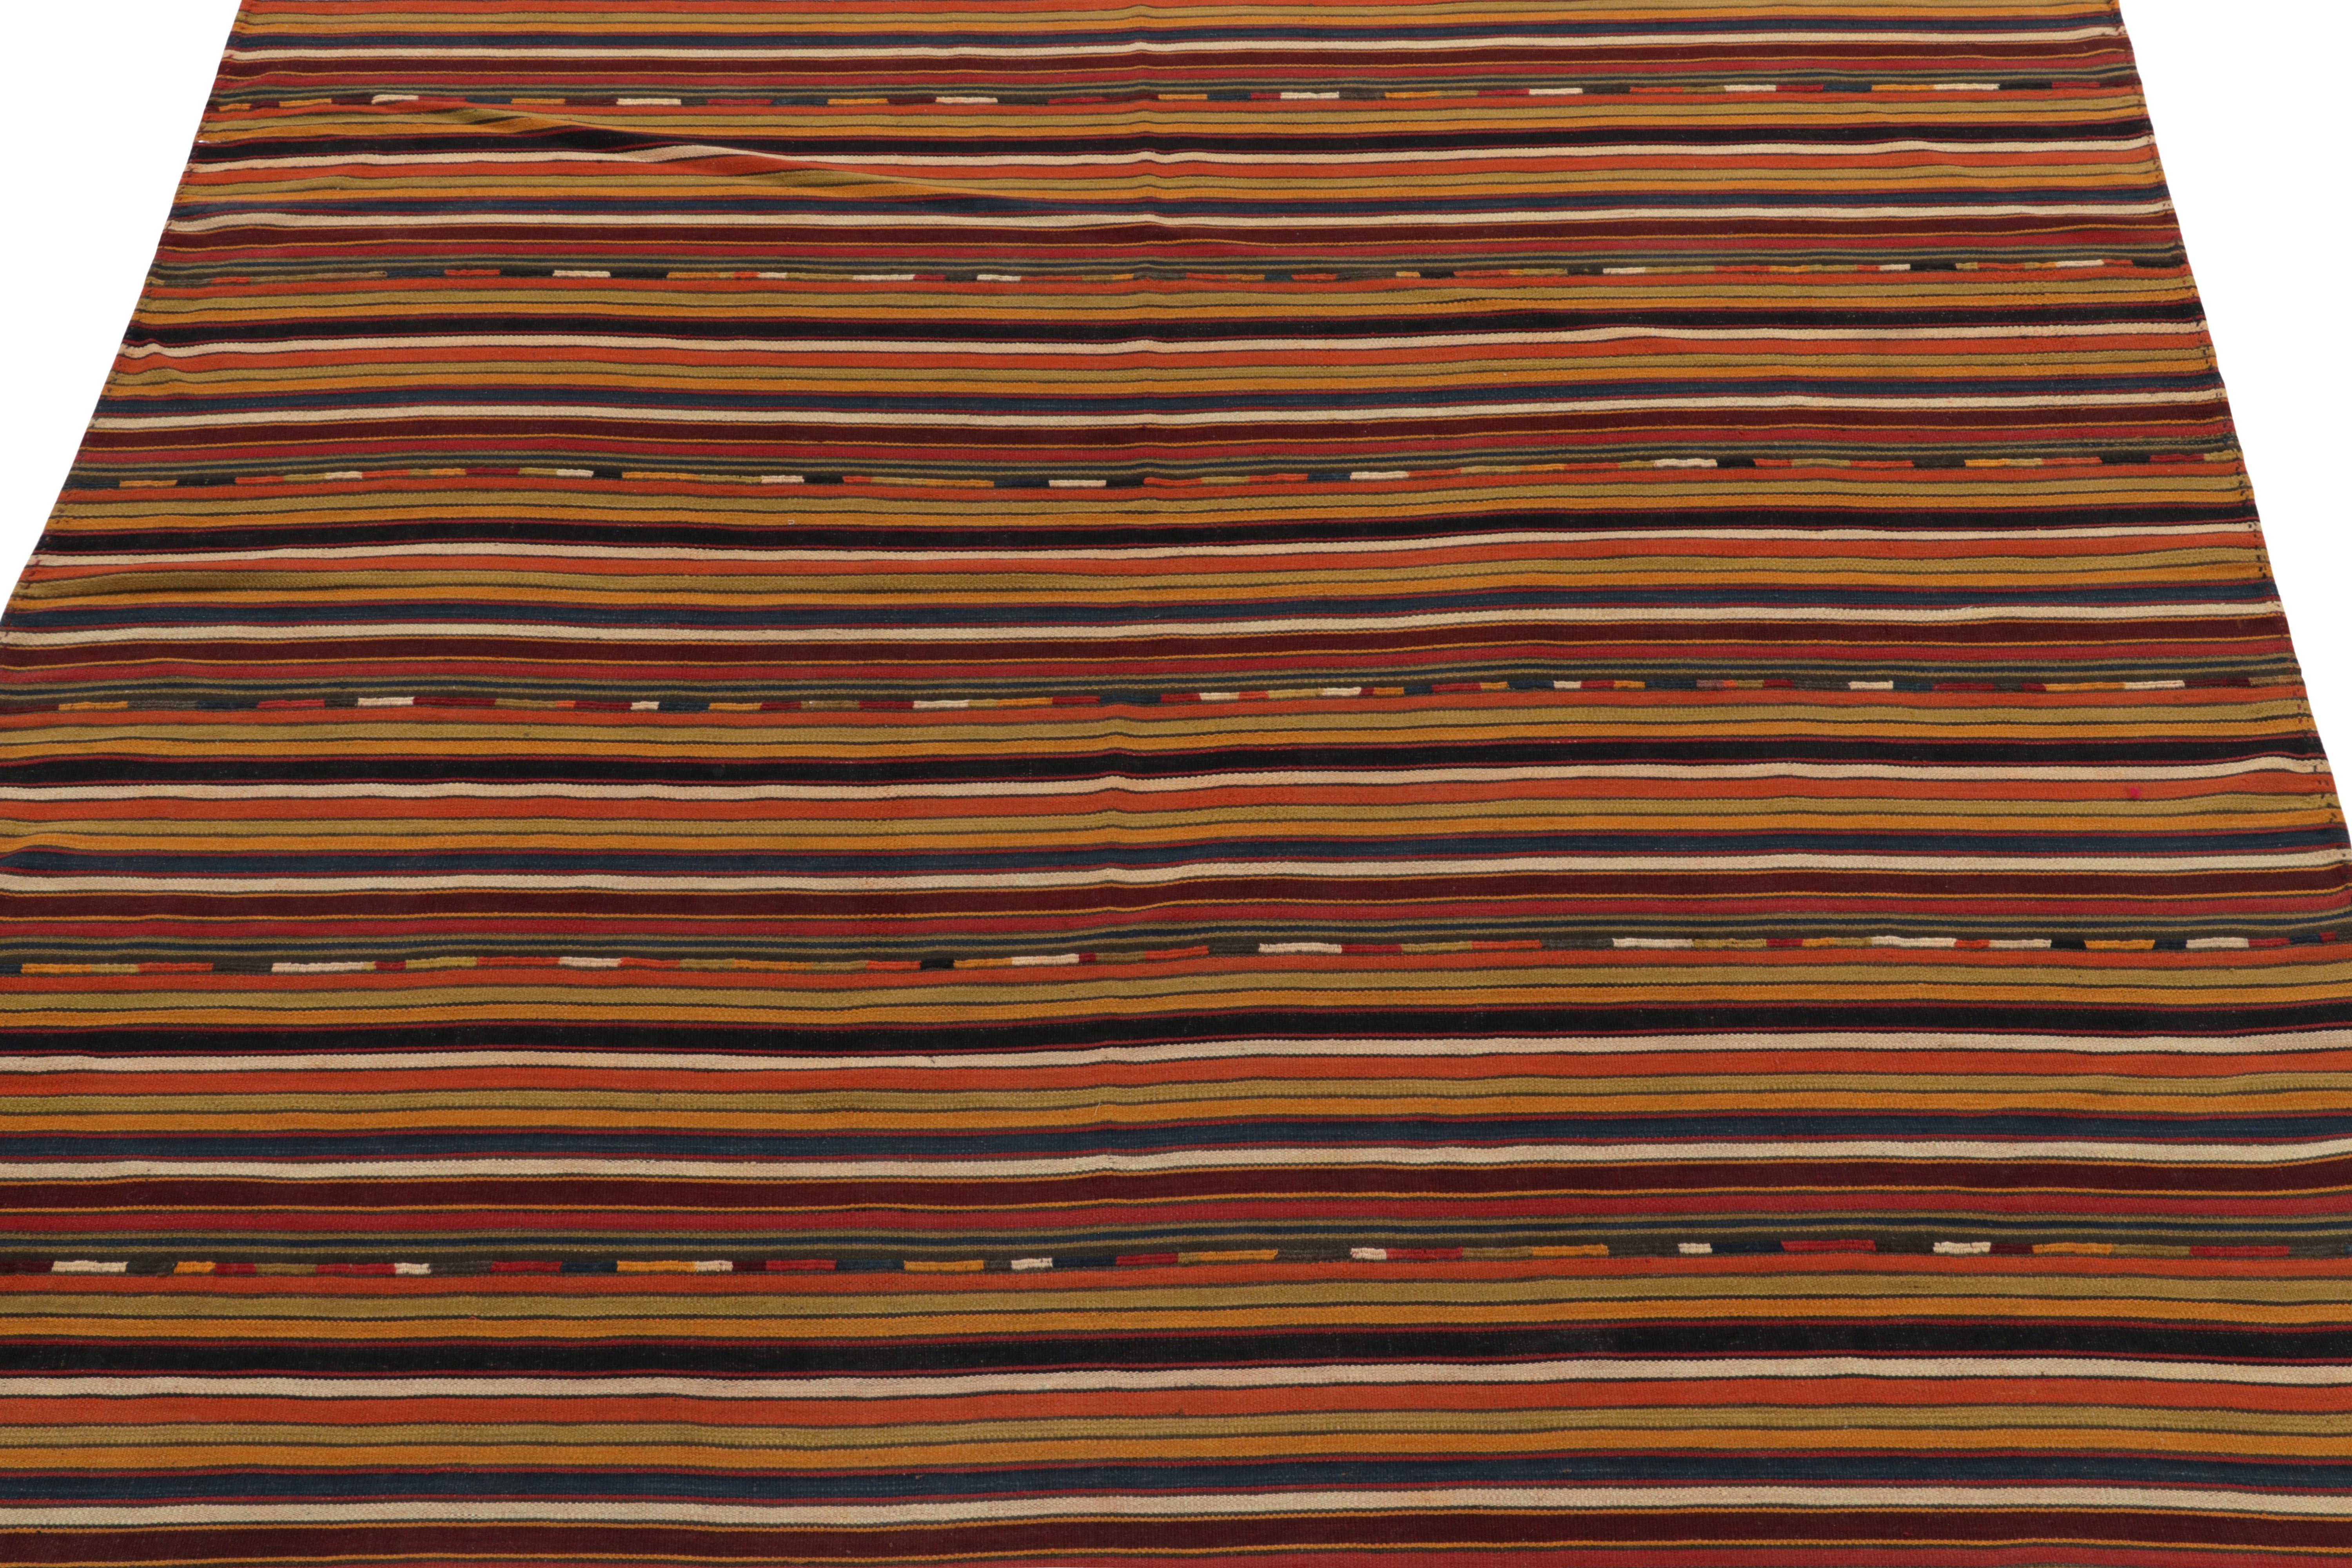 Originating from Turkey circa 1950-1960, a vintage kilim rug style now entering our classic flat weave selections. Characterized by fine detailing, the piece revels comfortably in warm brown, gold, green & red marking a less-common square flat weave